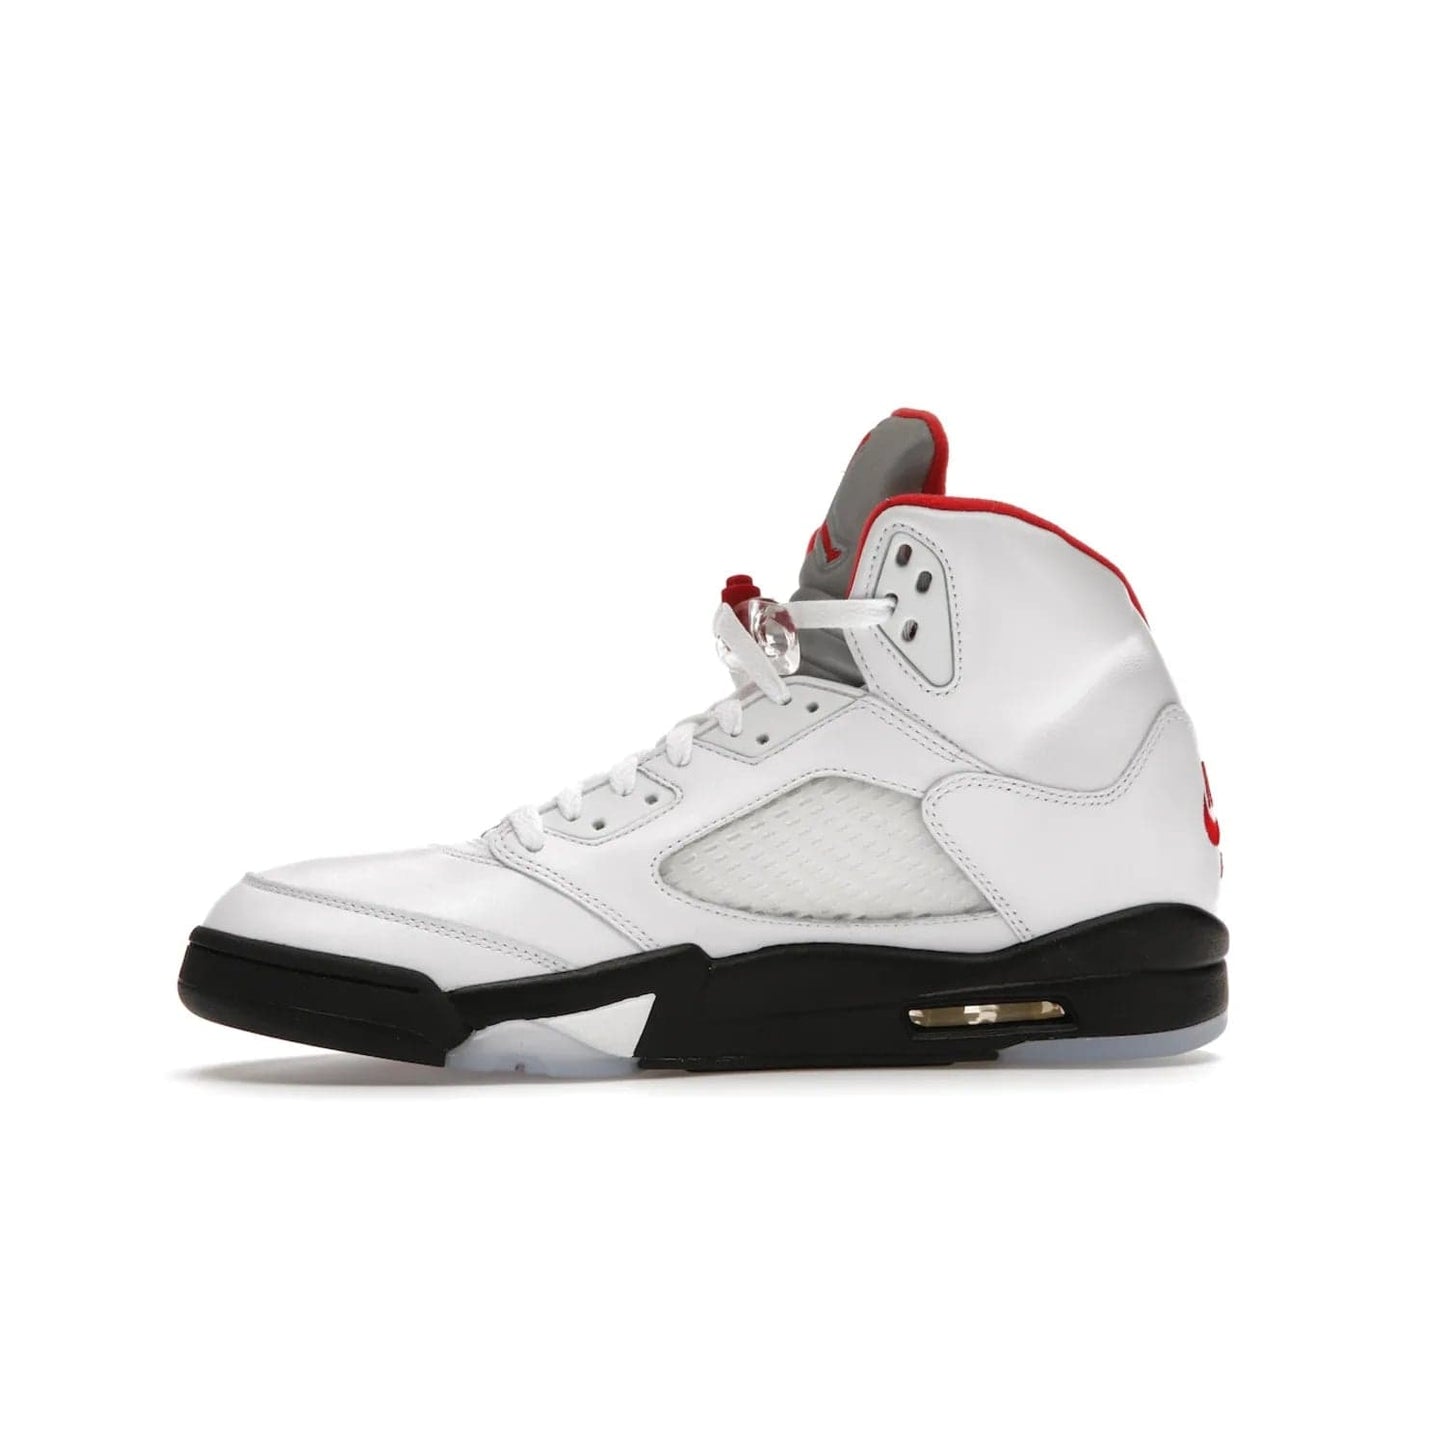 Jordan 5 Retro Fire Red Silver Tongue (2020) - Image 18 - Only at www.BallersClubKickz.com - Experience classic styling with the Jordan 5 Retro Fire Red Silver Tongue (2020). Features a white leather upper, 3M reflective tongue, midsole colorblocking, and an icy translucent outsole. Now available, upgrade your shoe collection today.